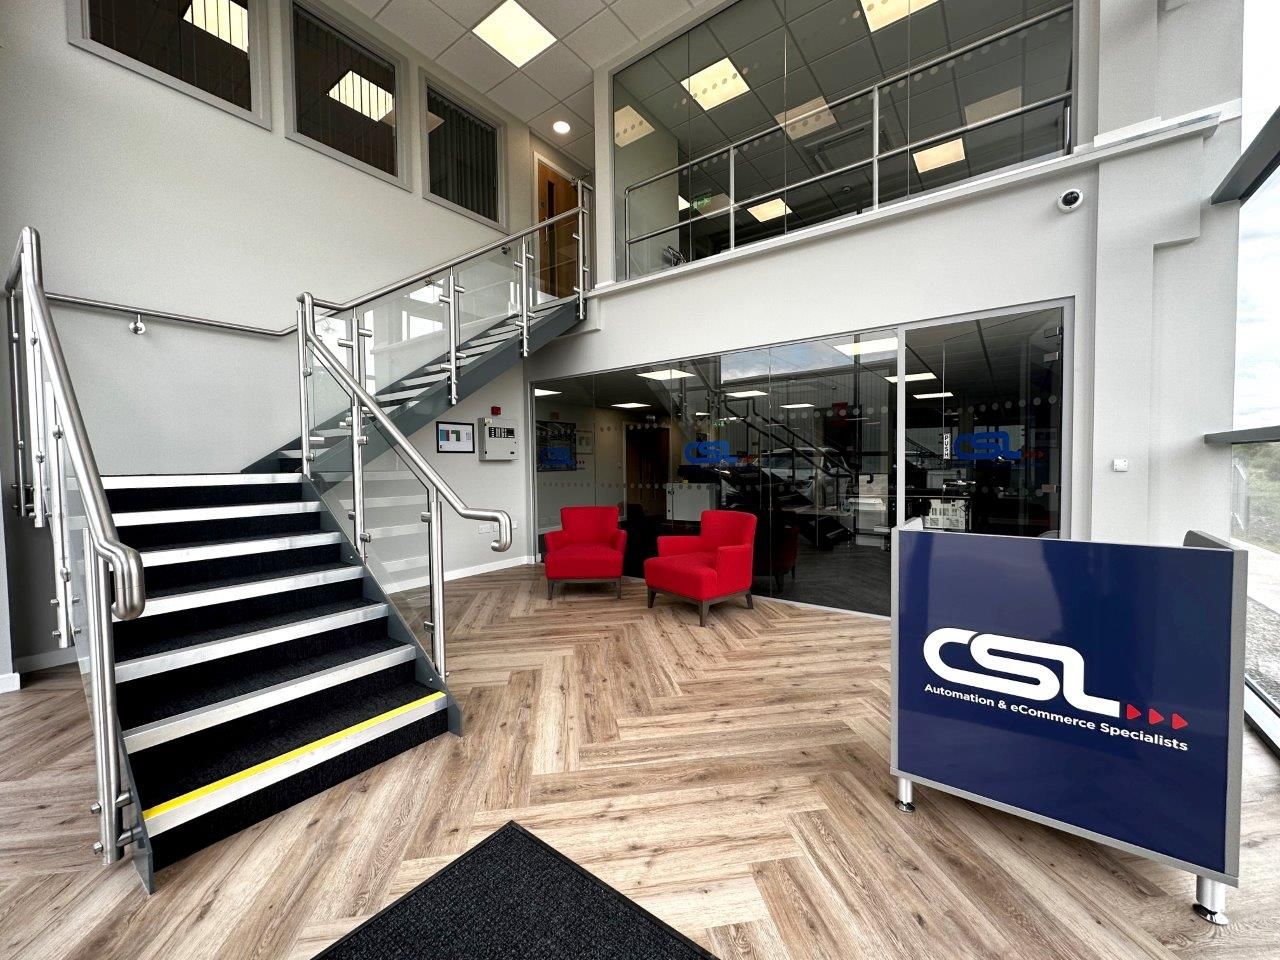 Conveyor Systems Ltd invests in new-build highly sustainable HQ